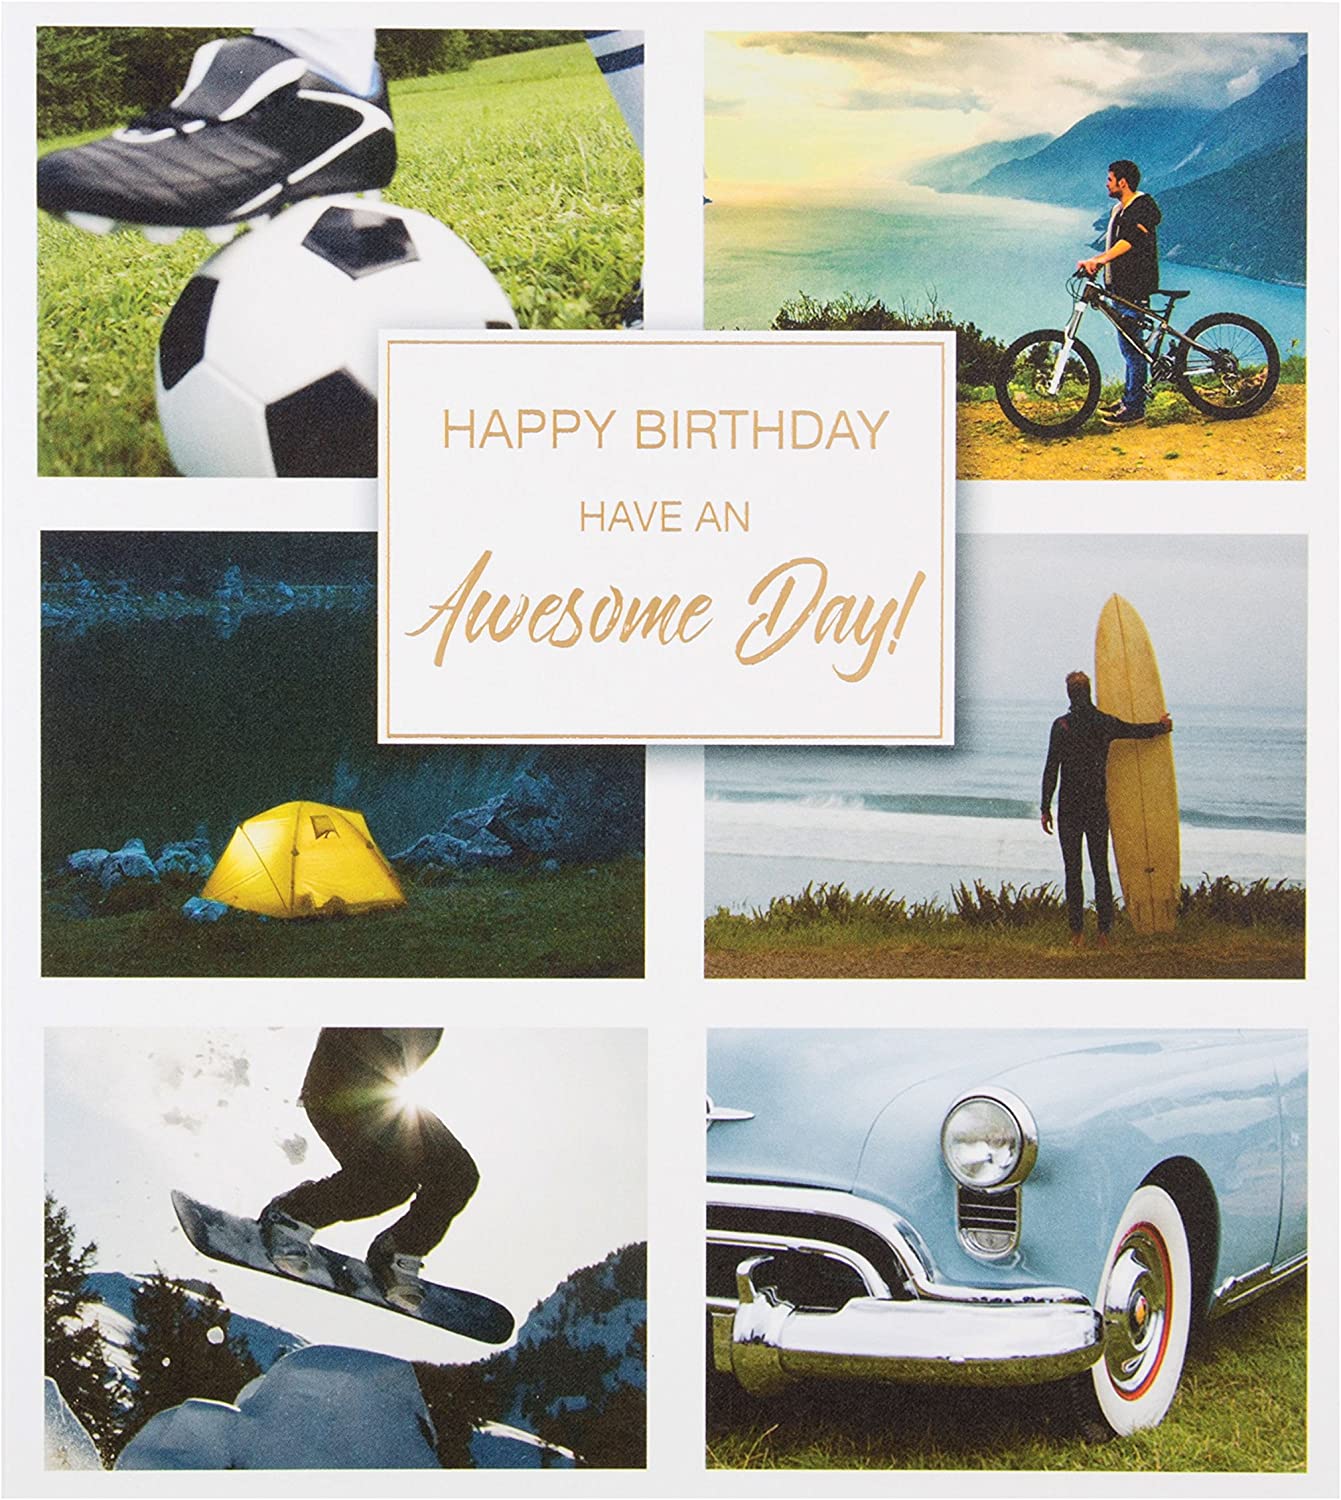 General Birthday Card  - The Great Outdoors